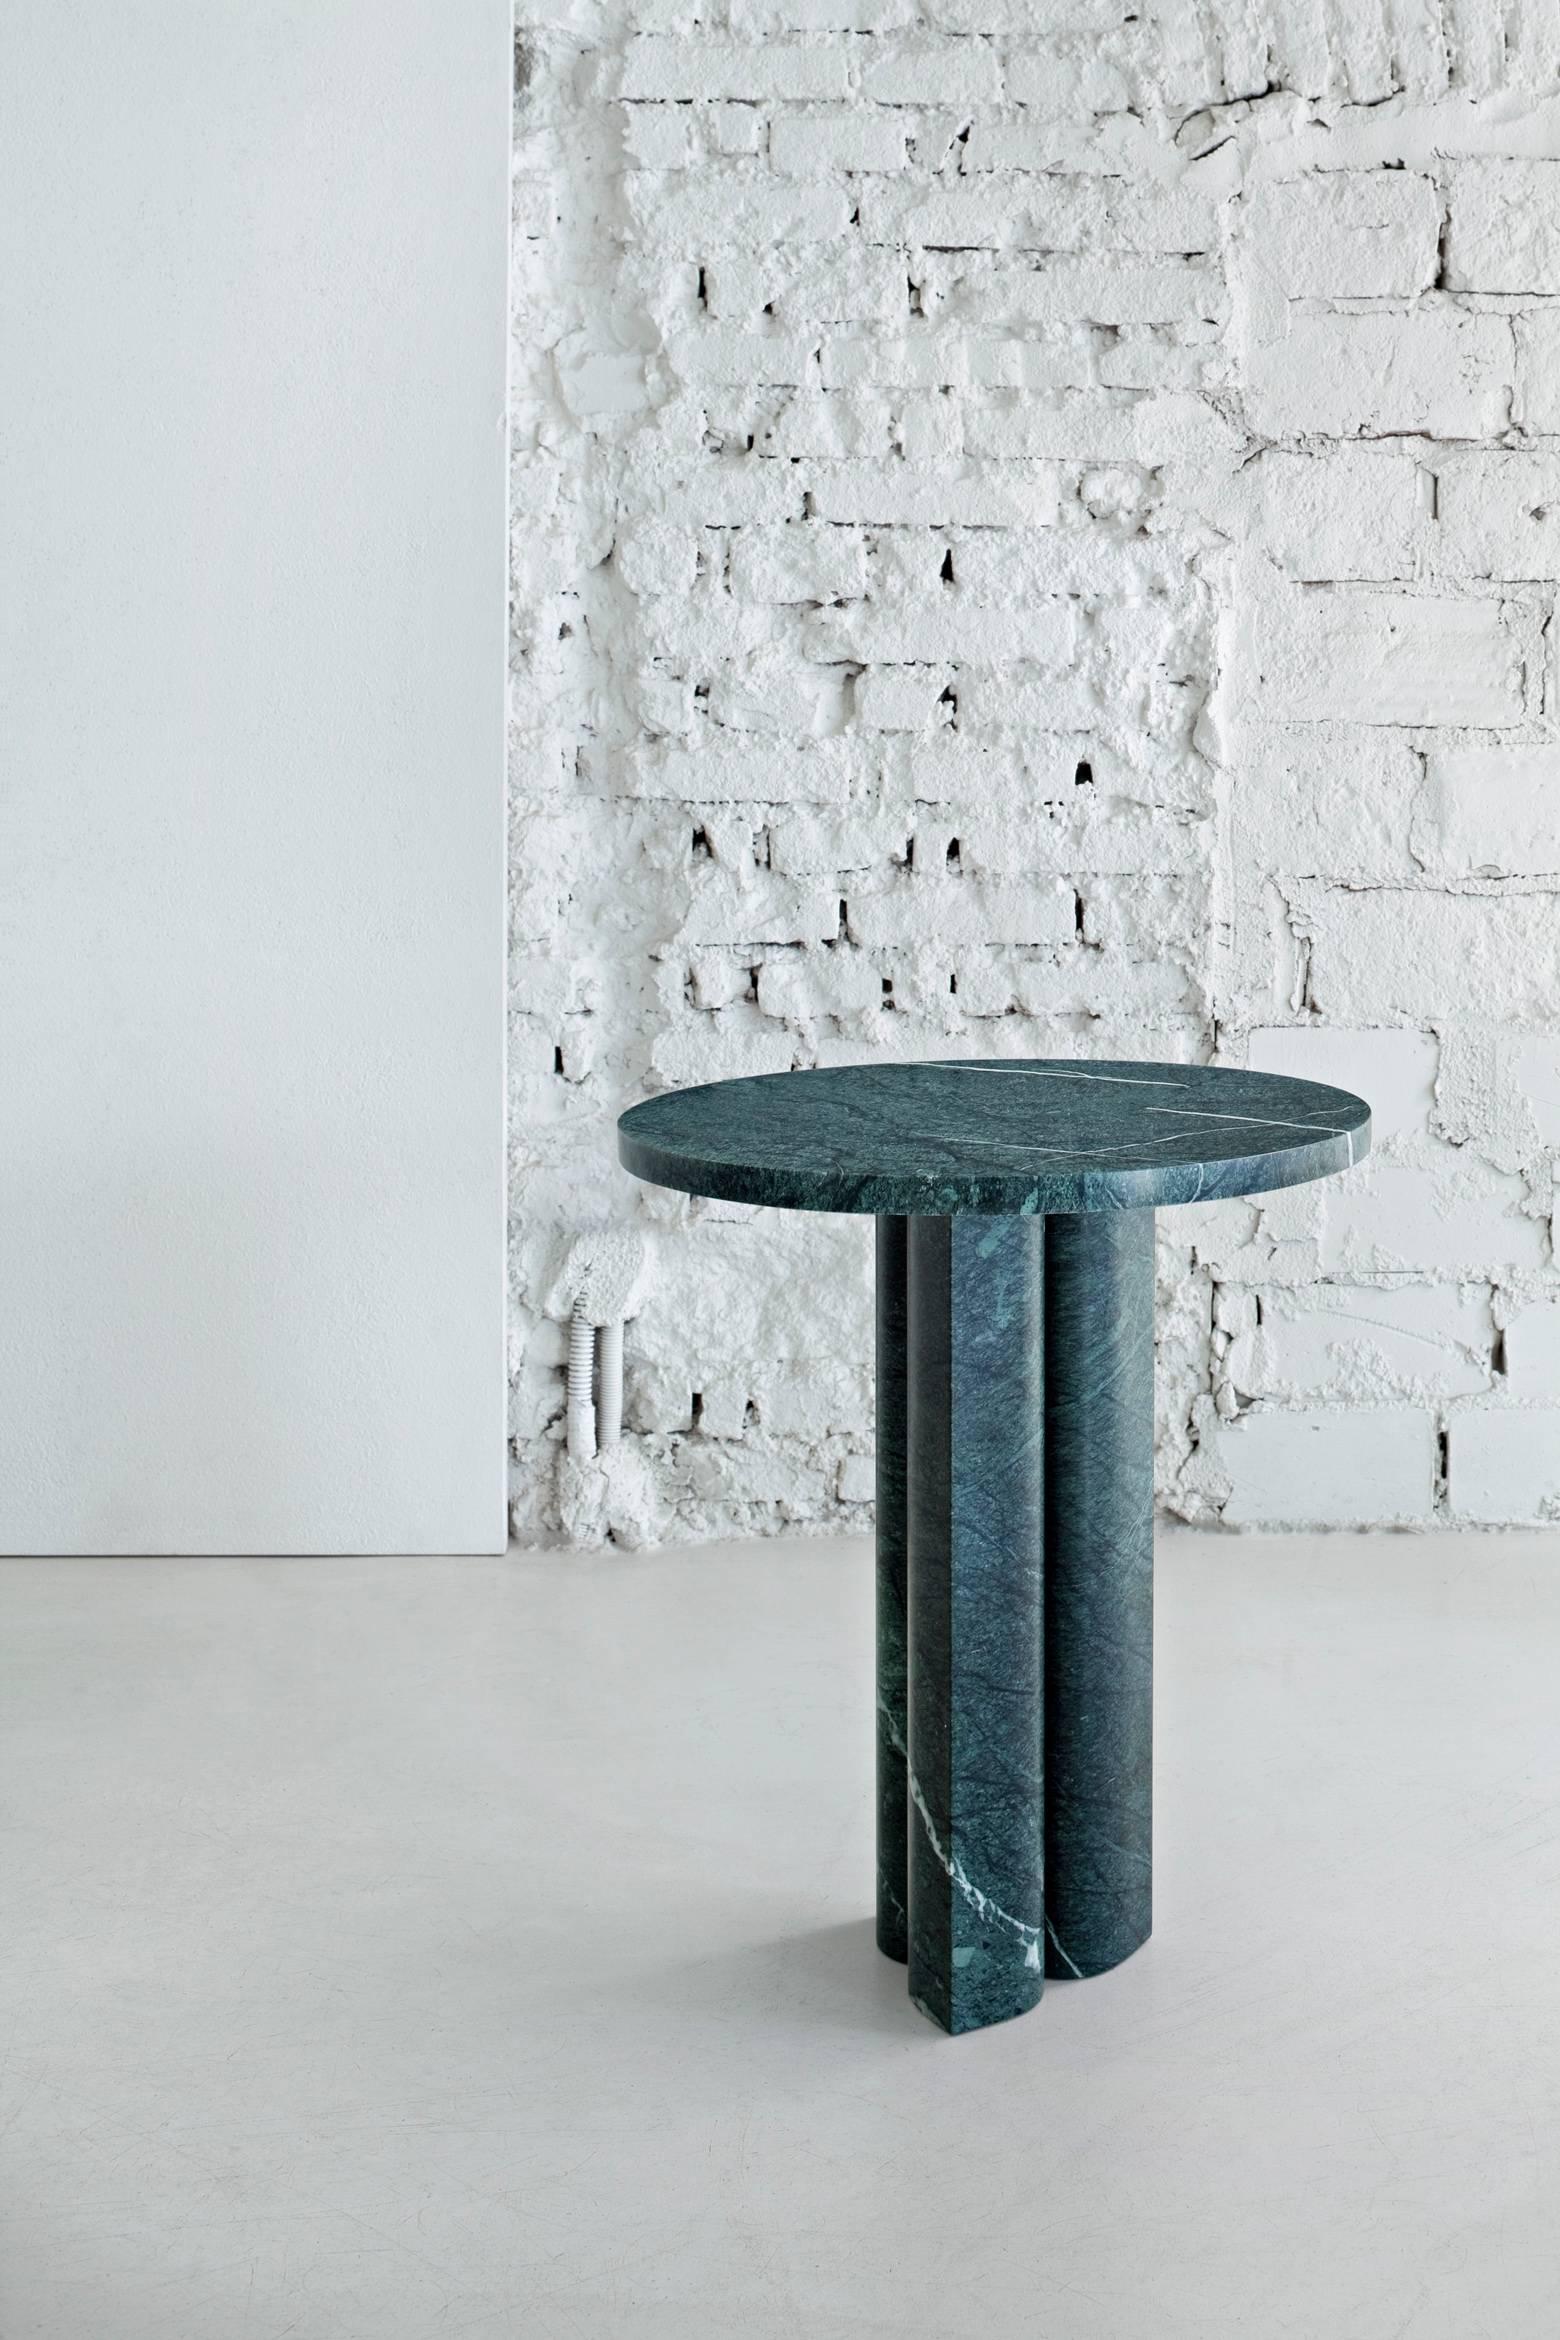 The stone is the star of the show in these tables which were designed by Michael Anastassiades with the specific intention of highlighting the opulence of the marbles chosen for his collection ‘Love Me, Love Me Not’.

Instead of the highly polished